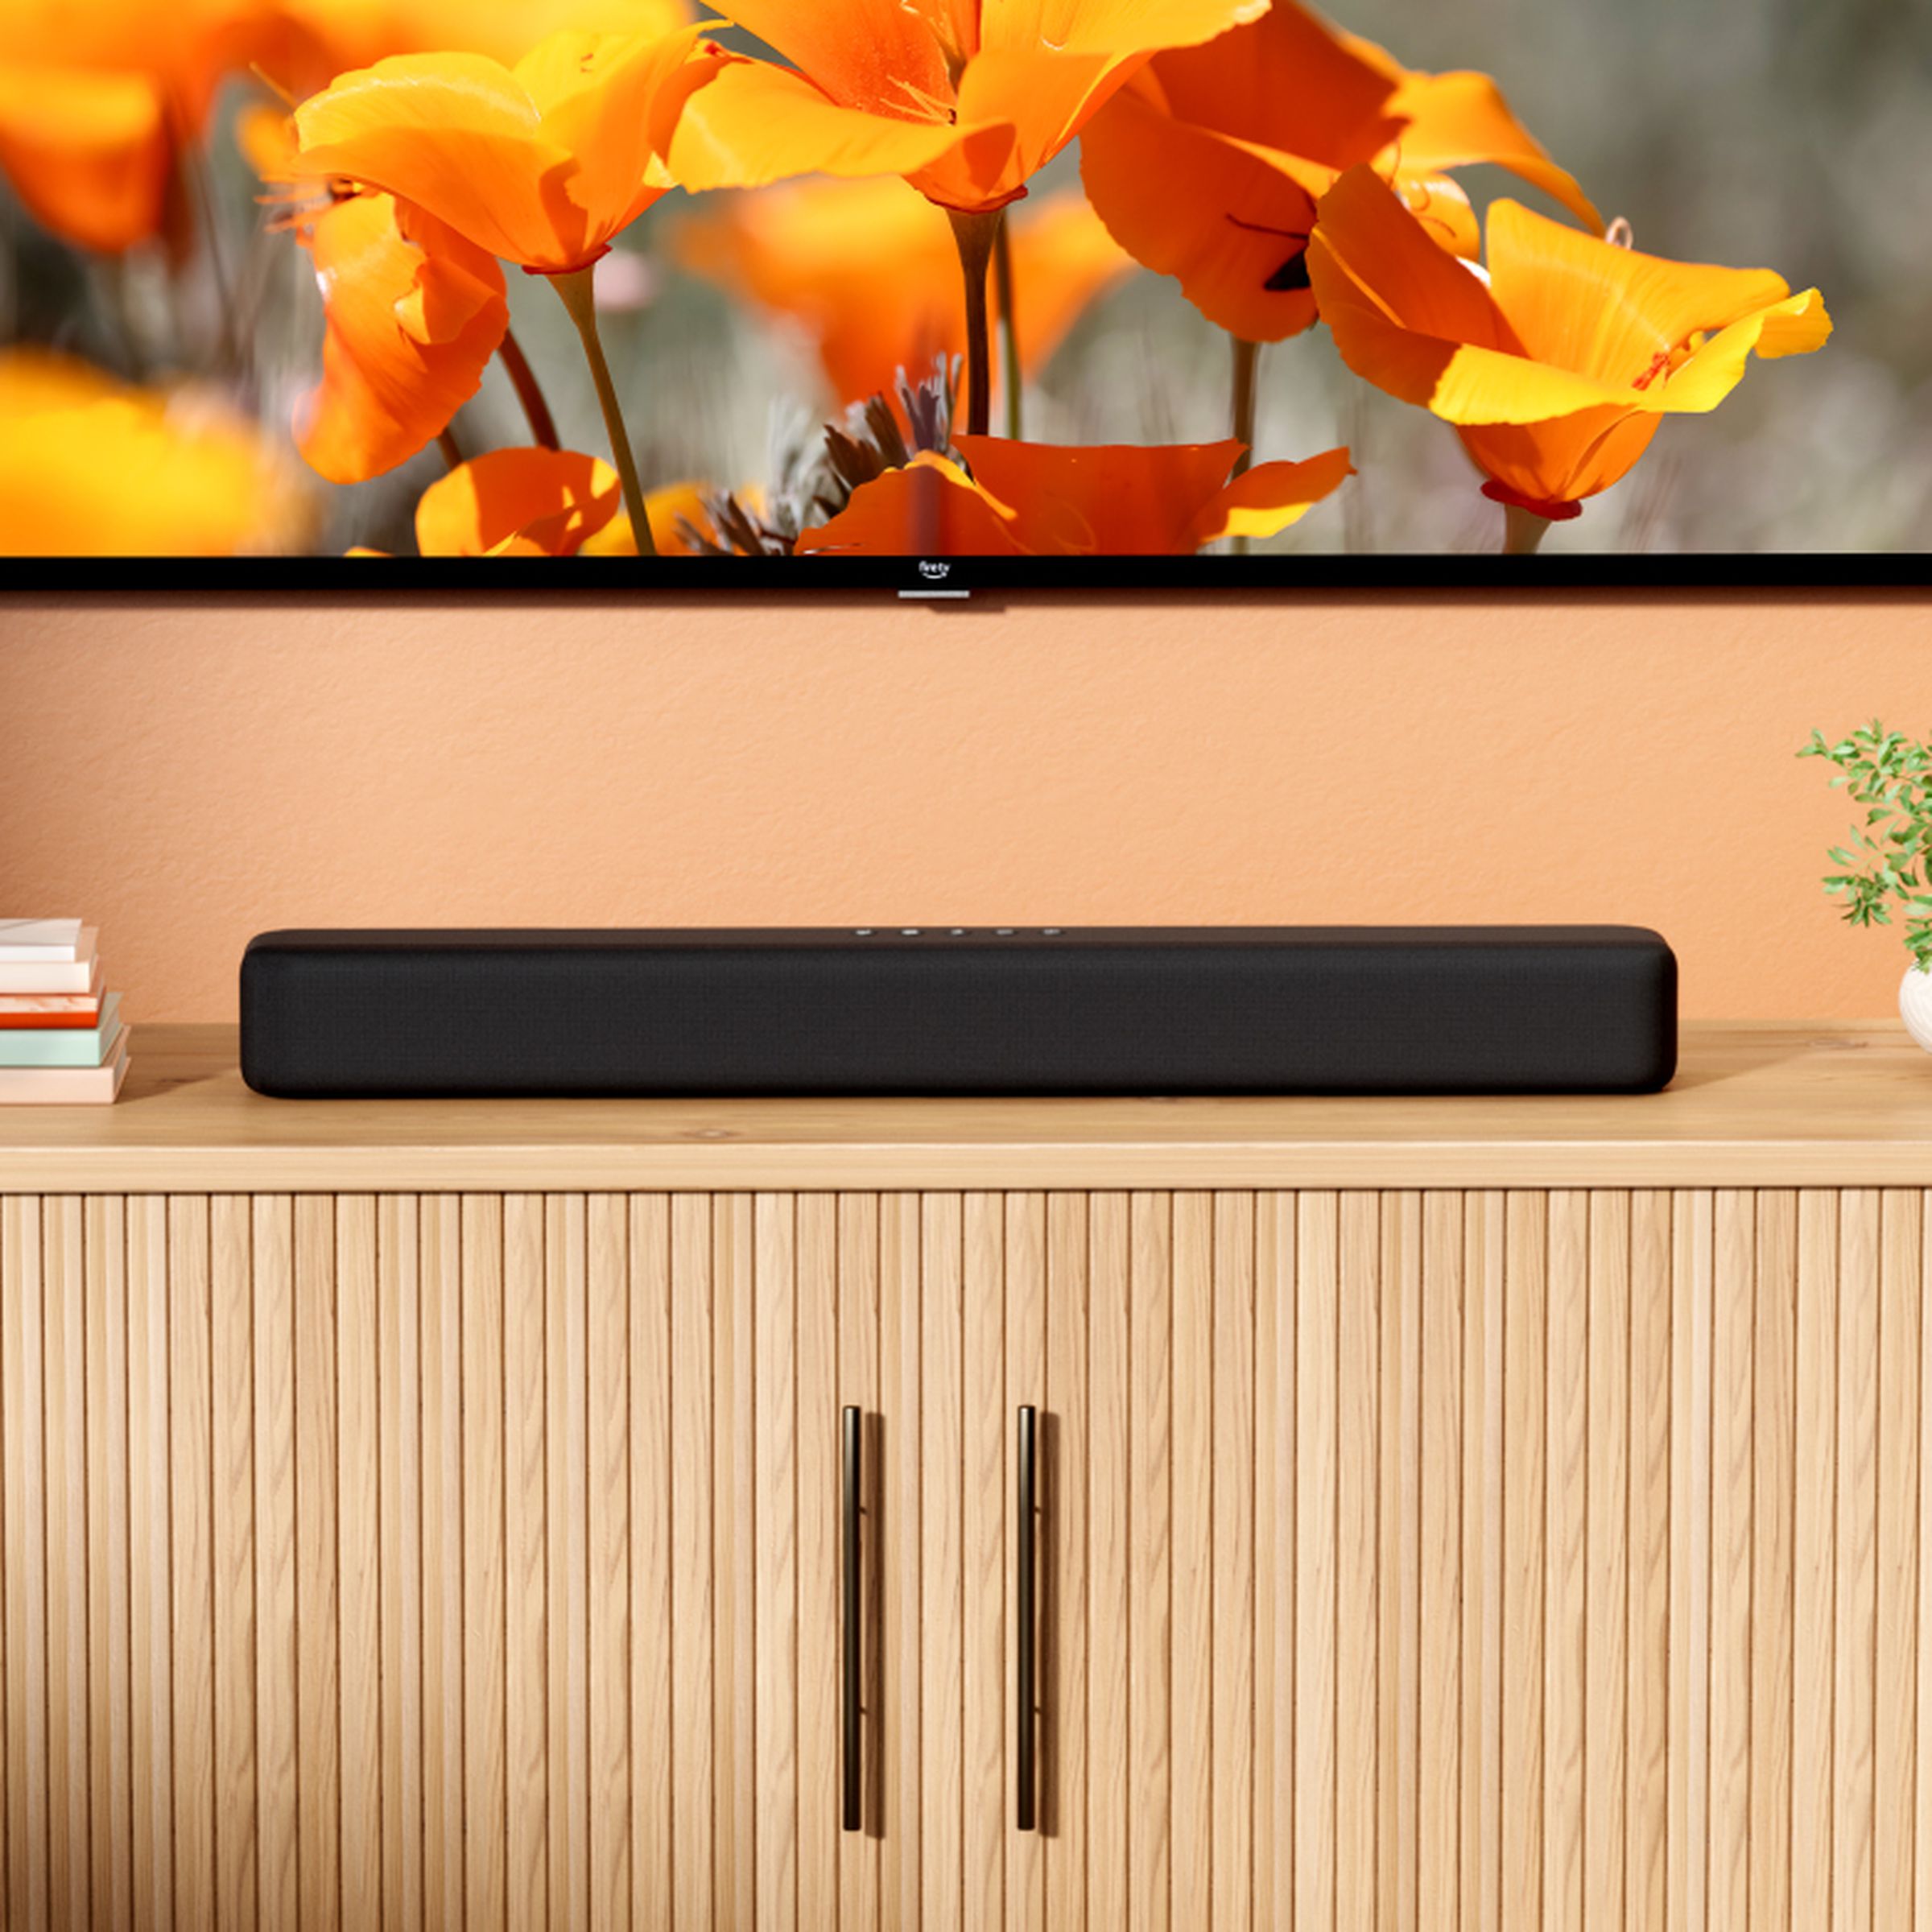 The Amazon Fire TV Soundbar positioned under a TV, sitting on a piece of furniture.